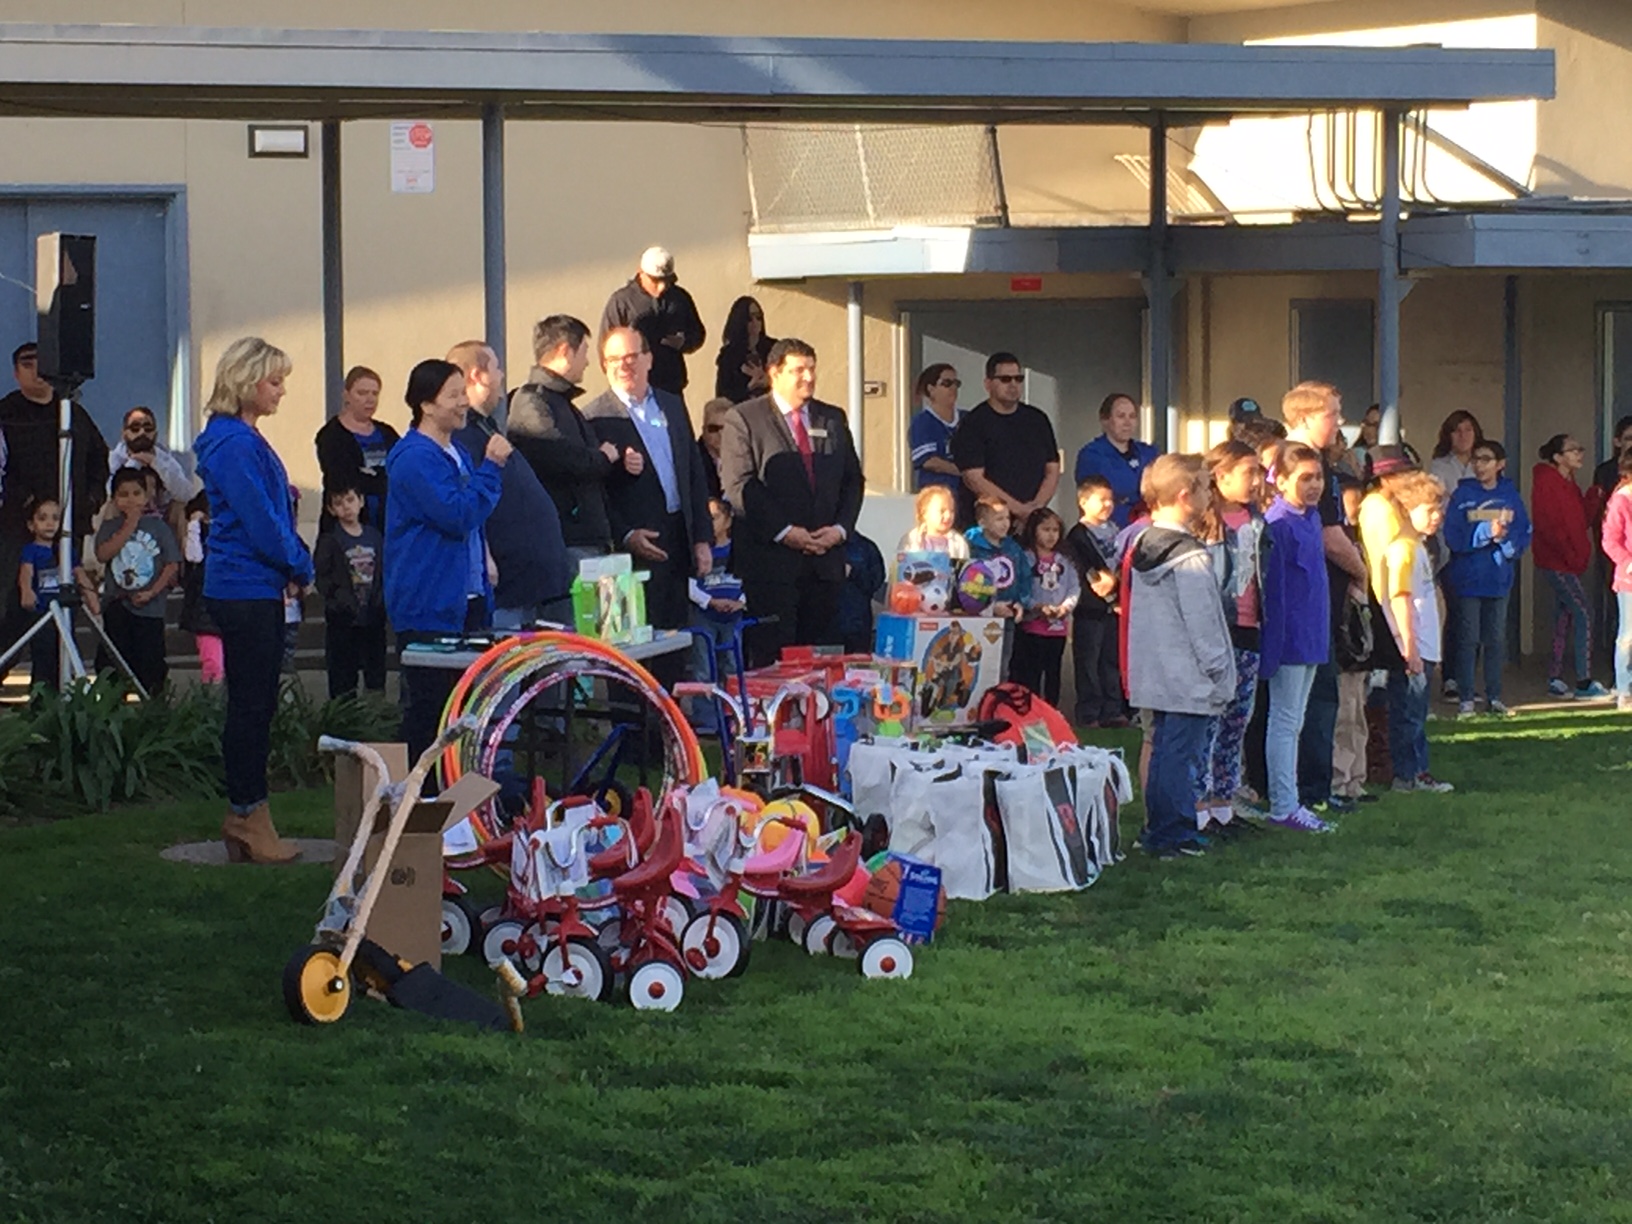 A collection of car enthusiasts known as The Purist Group helped collect new playground toys to Badillo Elementary after a burglary at their kinder program. Photo courtesy of the Charter Oak Unified School District.